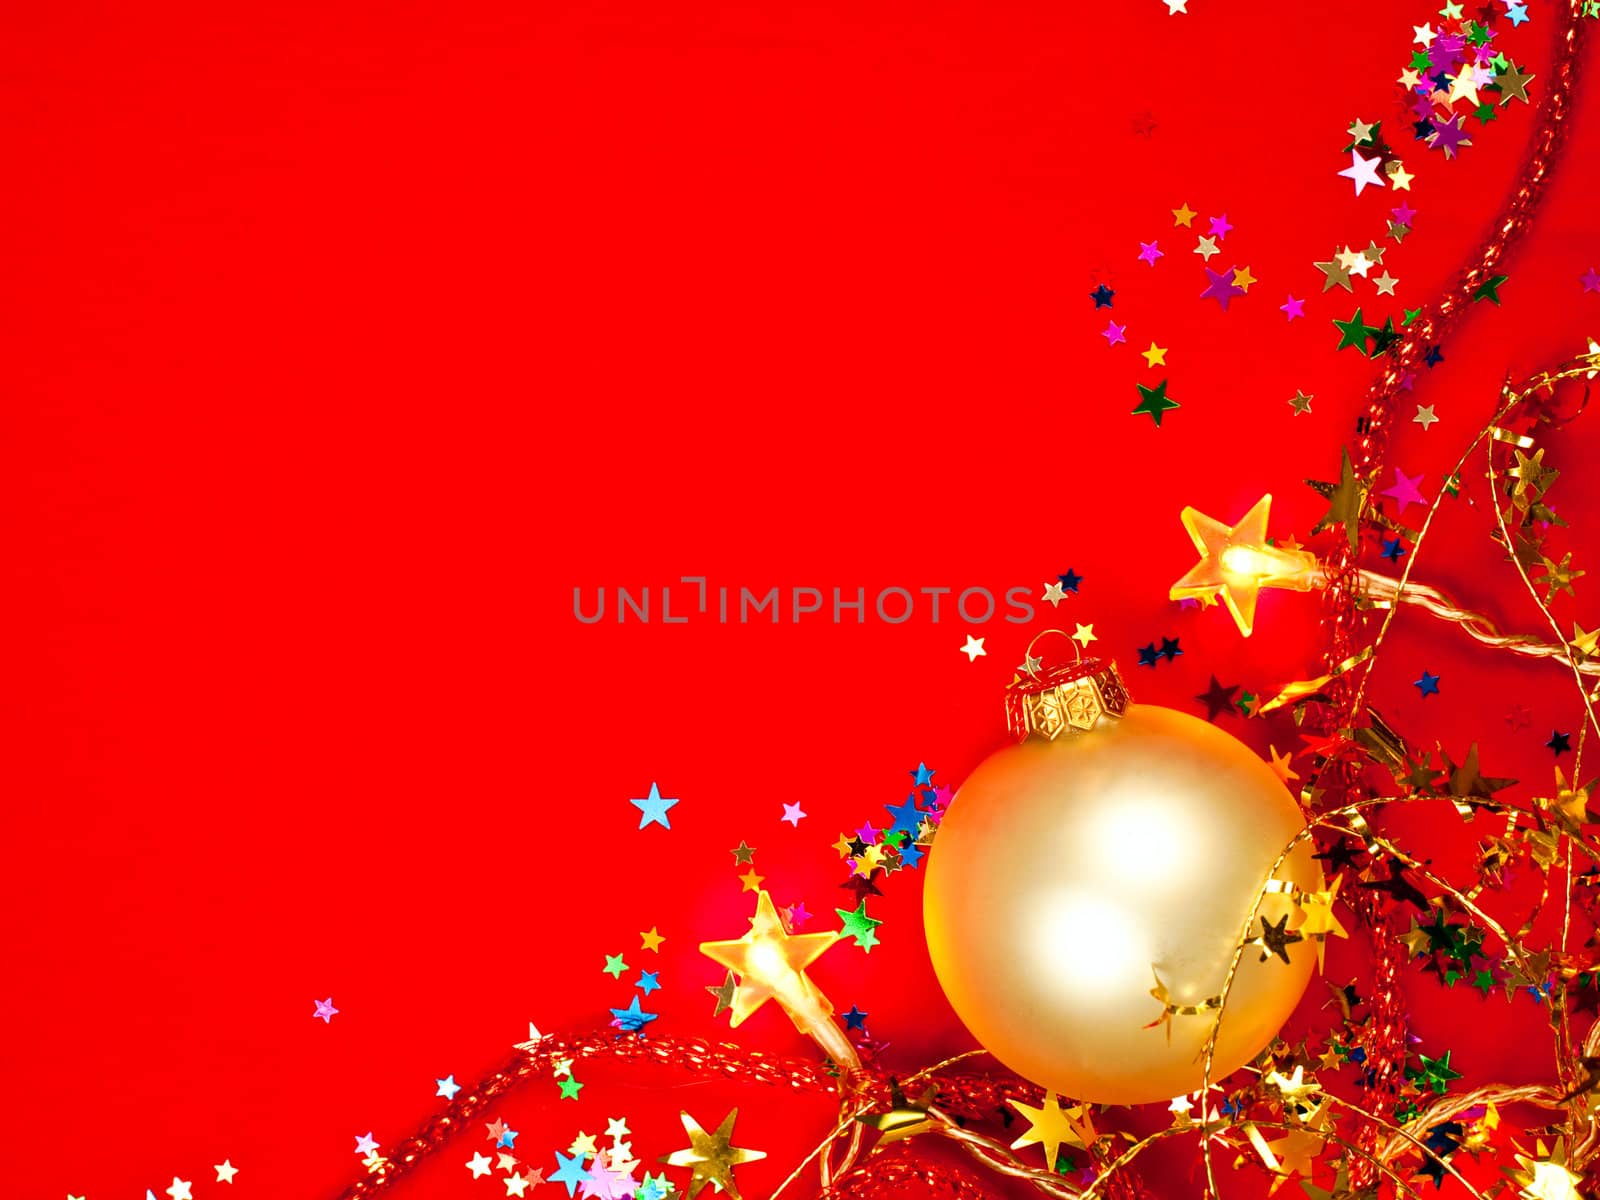 Christmas bauble with star-shaped lights and tinsel on red background, shallow DOF